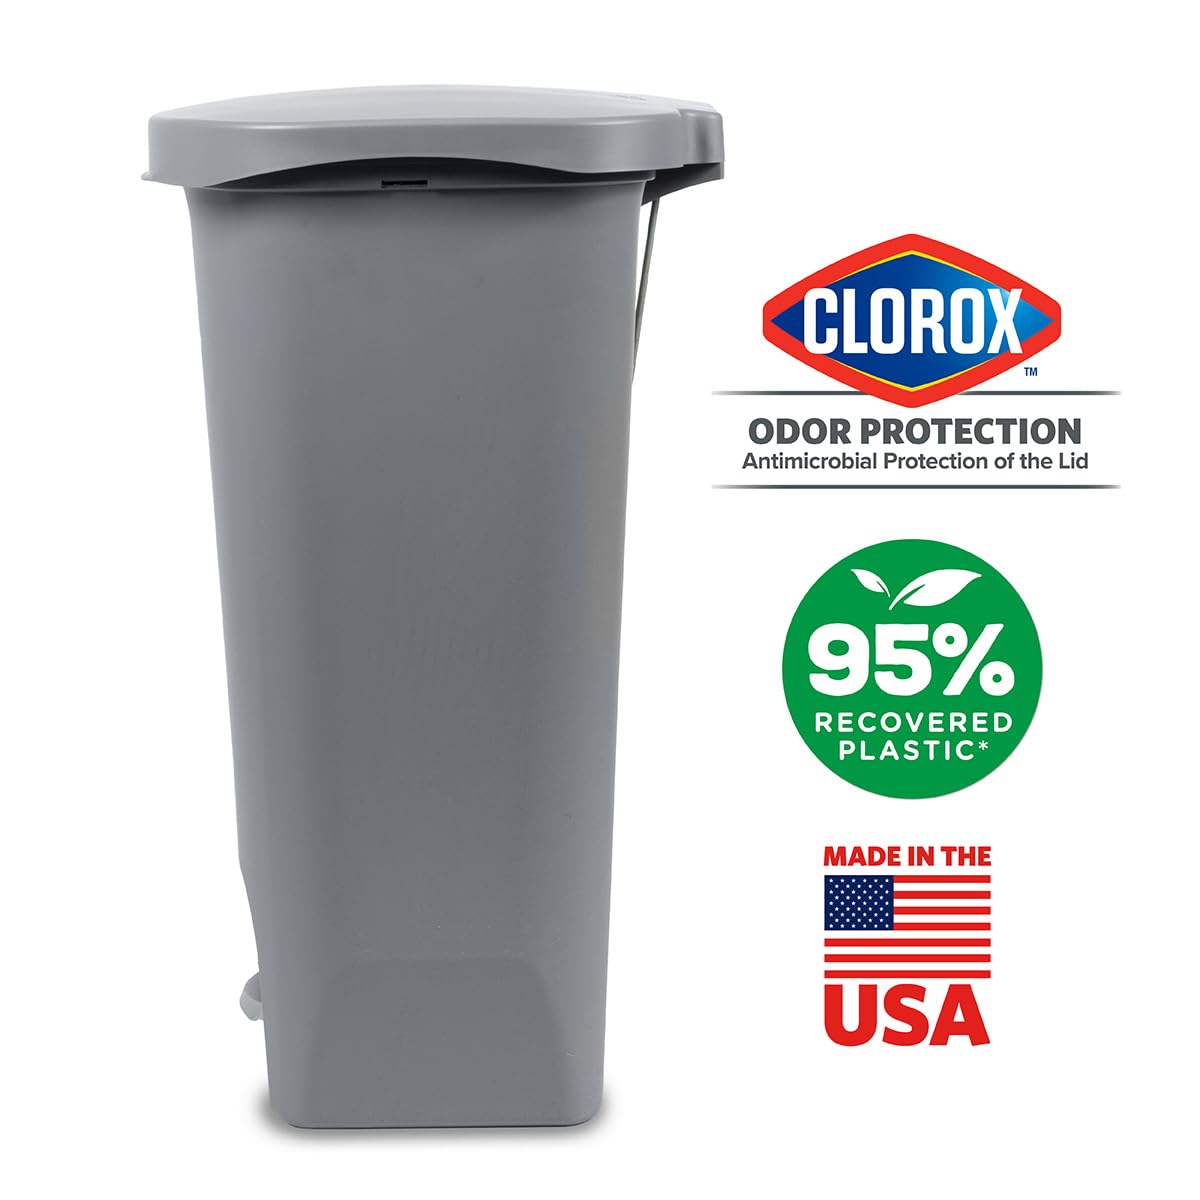 https://bigbigmart.com/wp-content/uploads/2023/10/Glad-Trash-Can-Plastic-Kitchen-Waste-Bin-with-Odor-Protection-of-Lid-Hands-Free-with-Step-On-Foot-Pedal-and-Garbage-Bag-Rings-13-Gallon-Grey2.jpg